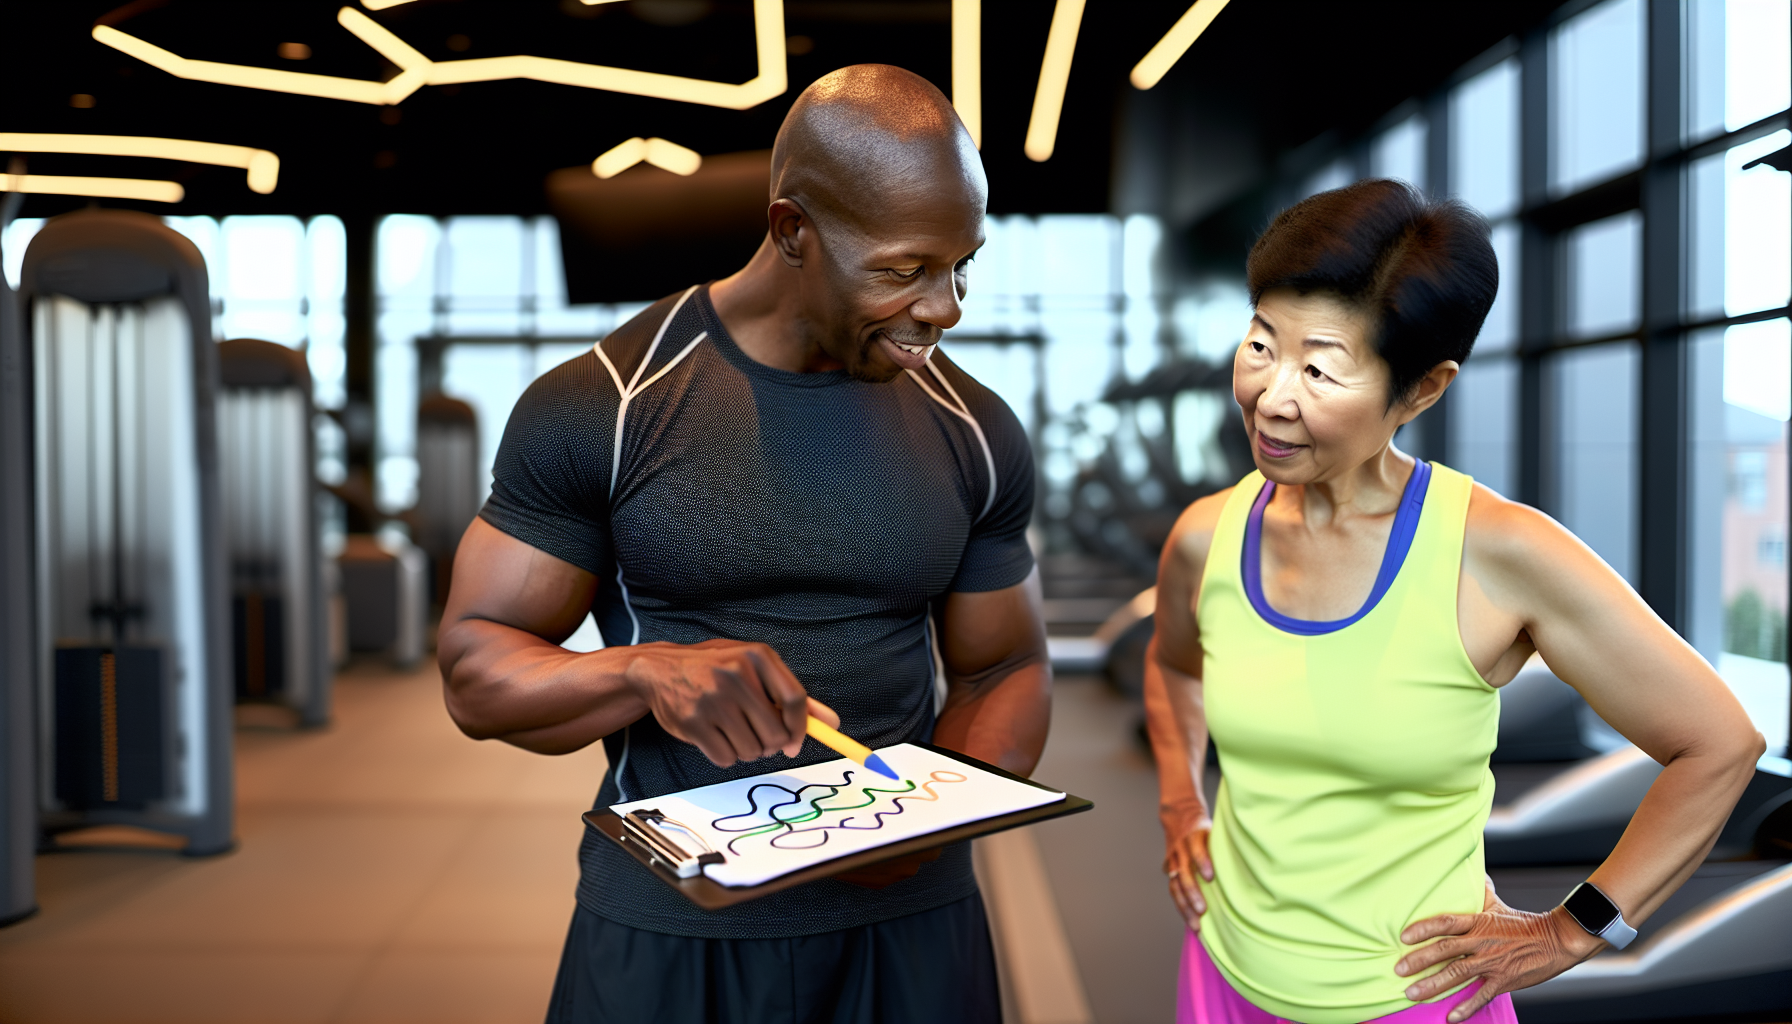 Personal trainer designing a customized workout program